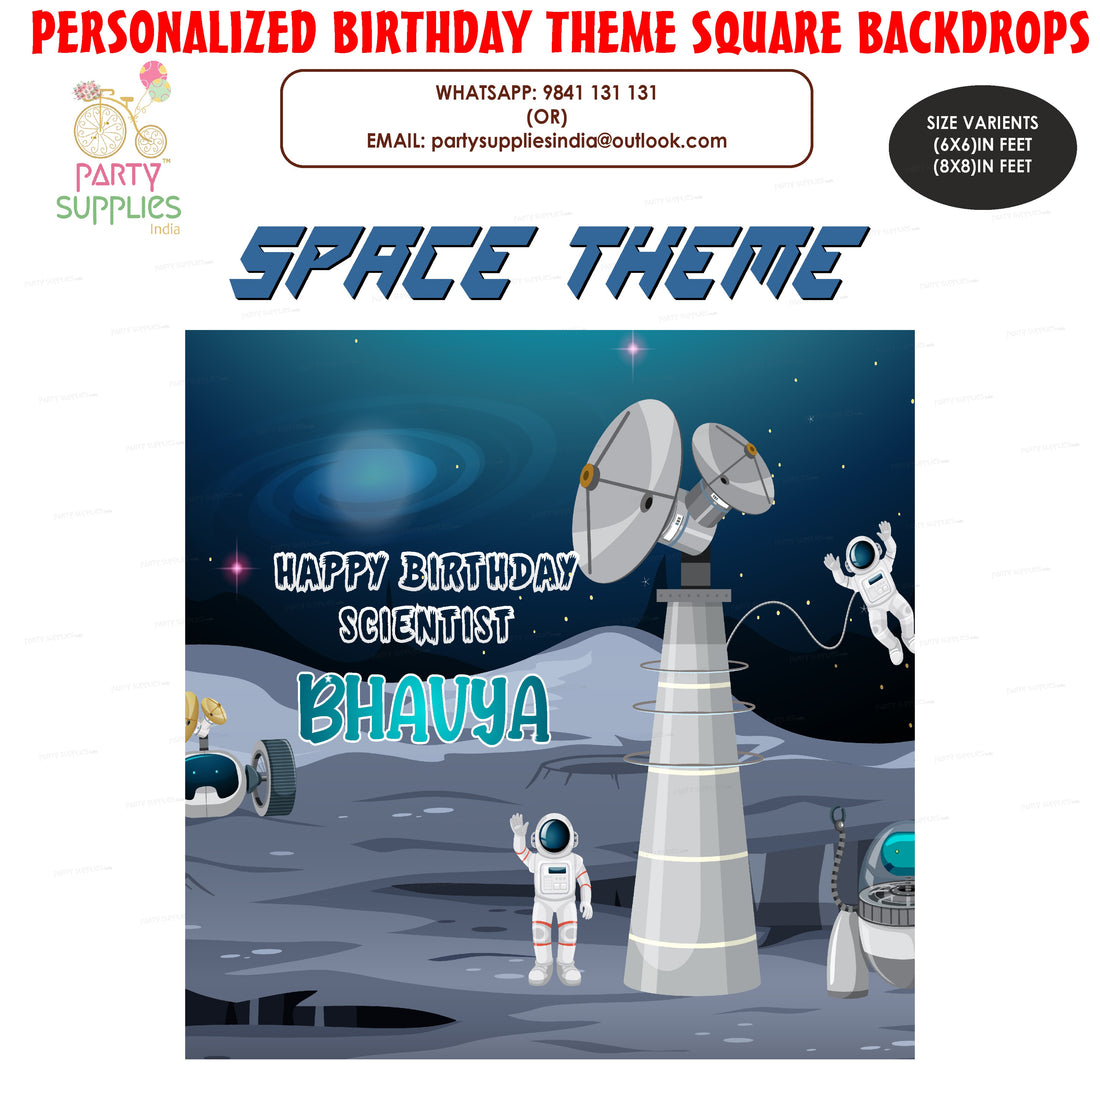 PSI Space Theme Customized Square Backdrop